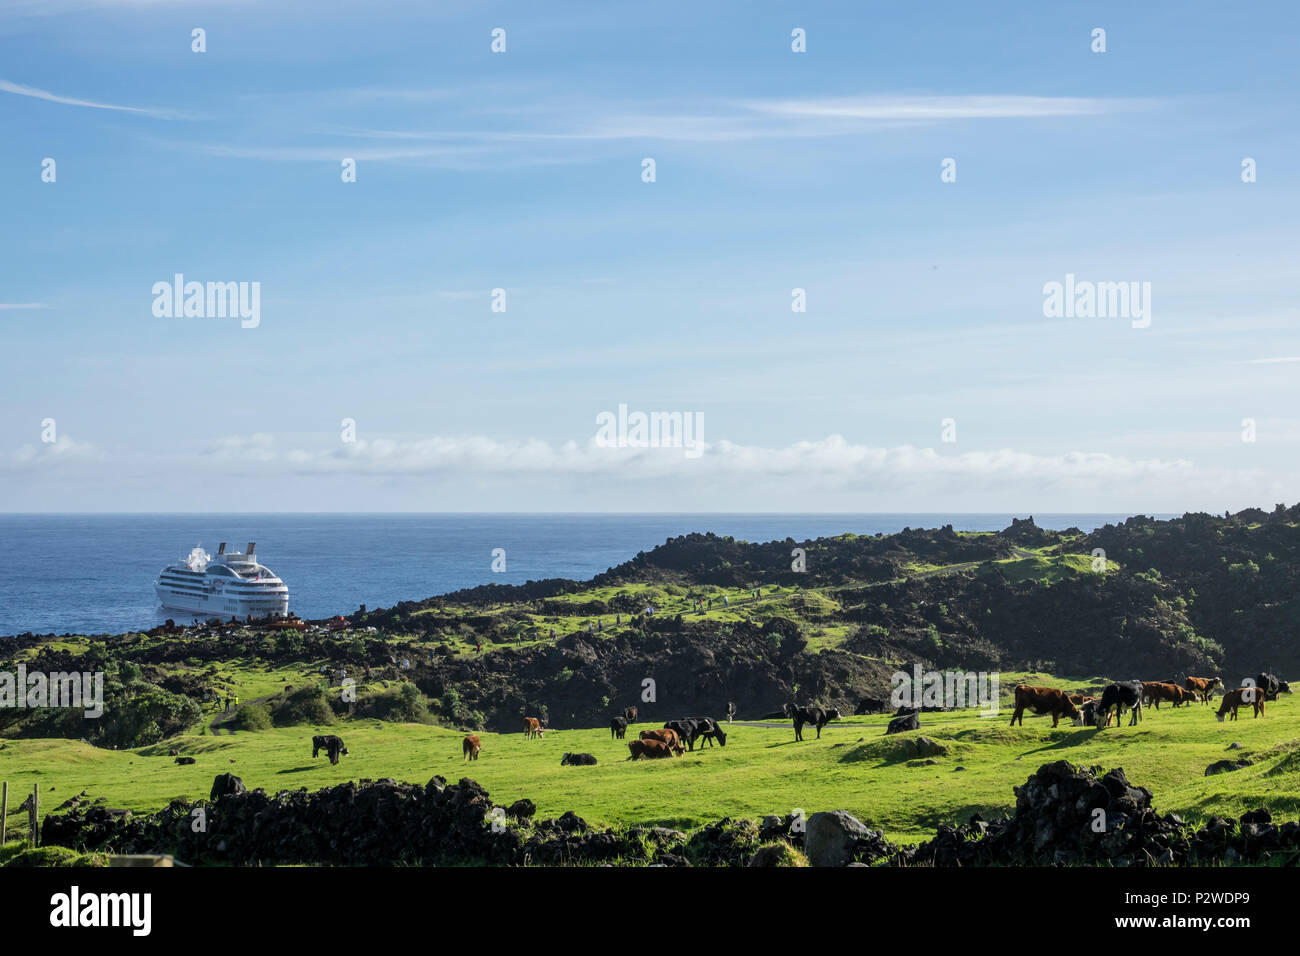 Cows grazing in paddock with Le Lyrial in background at Tristan da Cunha, British Overseas Territories, South Atlantic Ocean Stock Photo